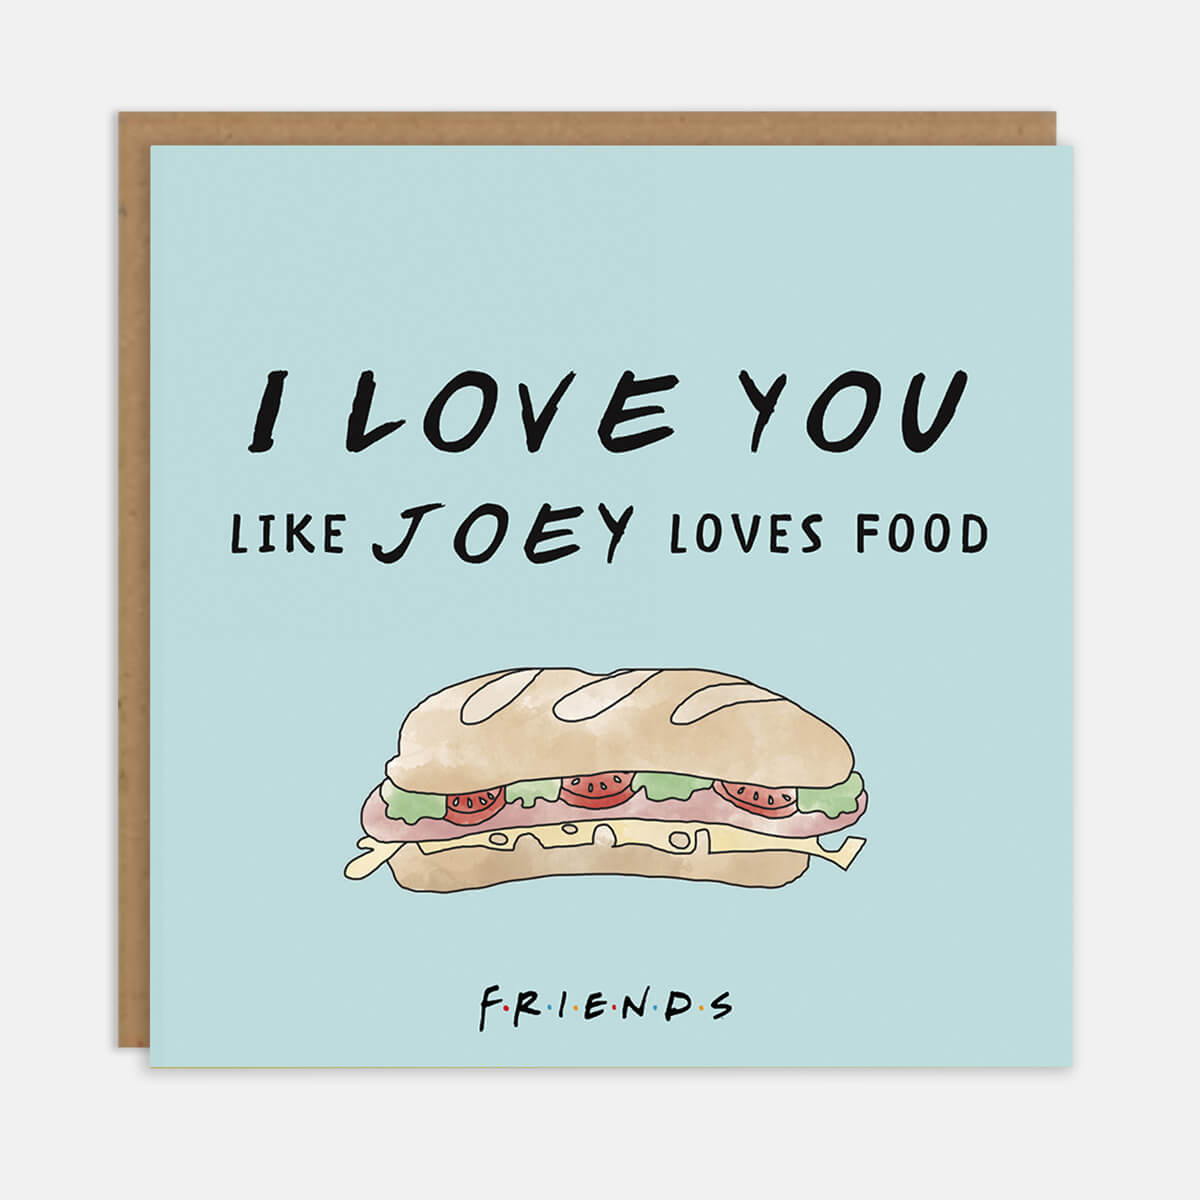 Friends TV Show Anniversary Card - Joey Tribbiani "I Love You Like Joey Loves Food" - Pastel Blue Card with Black foiled and embossed text